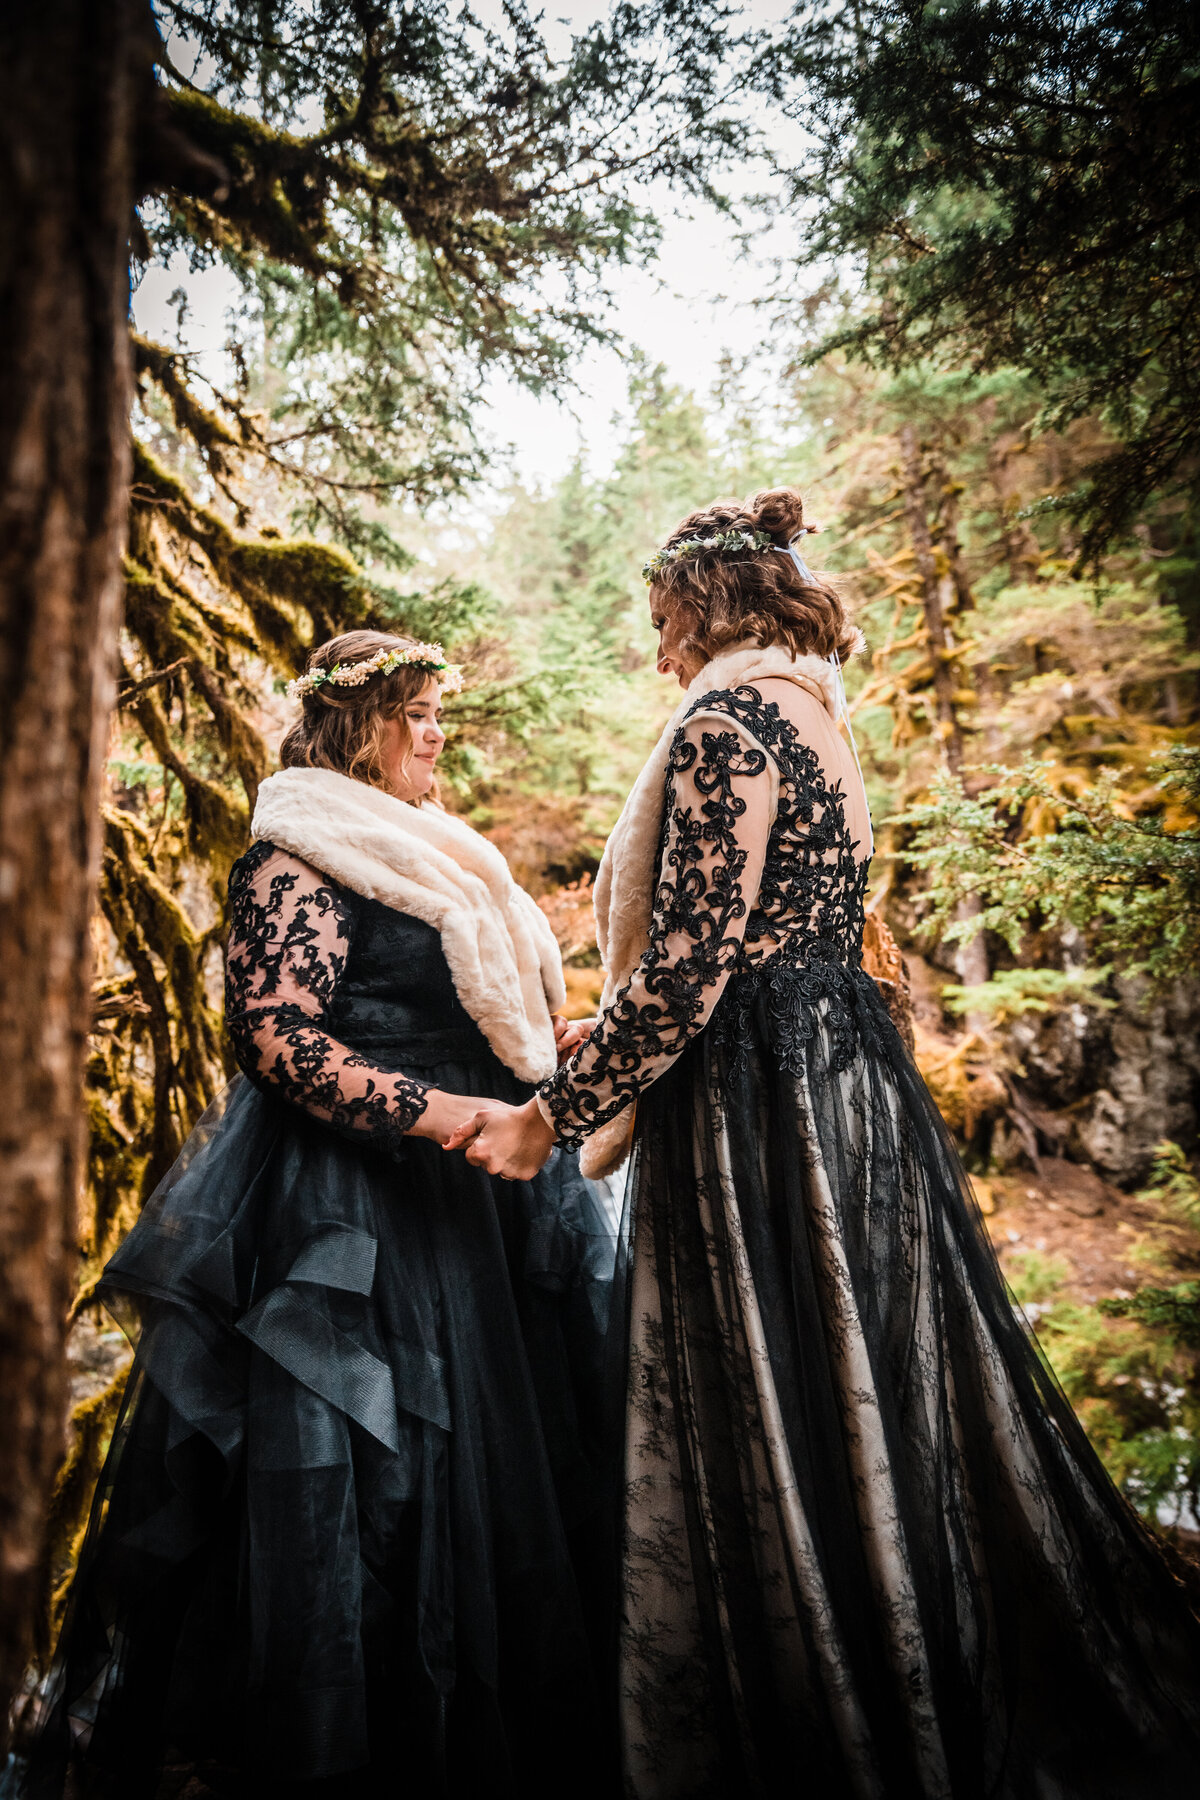 Two brides, both wearing black wedding gowns, flower crowns, and white fur stoles, hold hands during their Alaskan elopement ceremony.